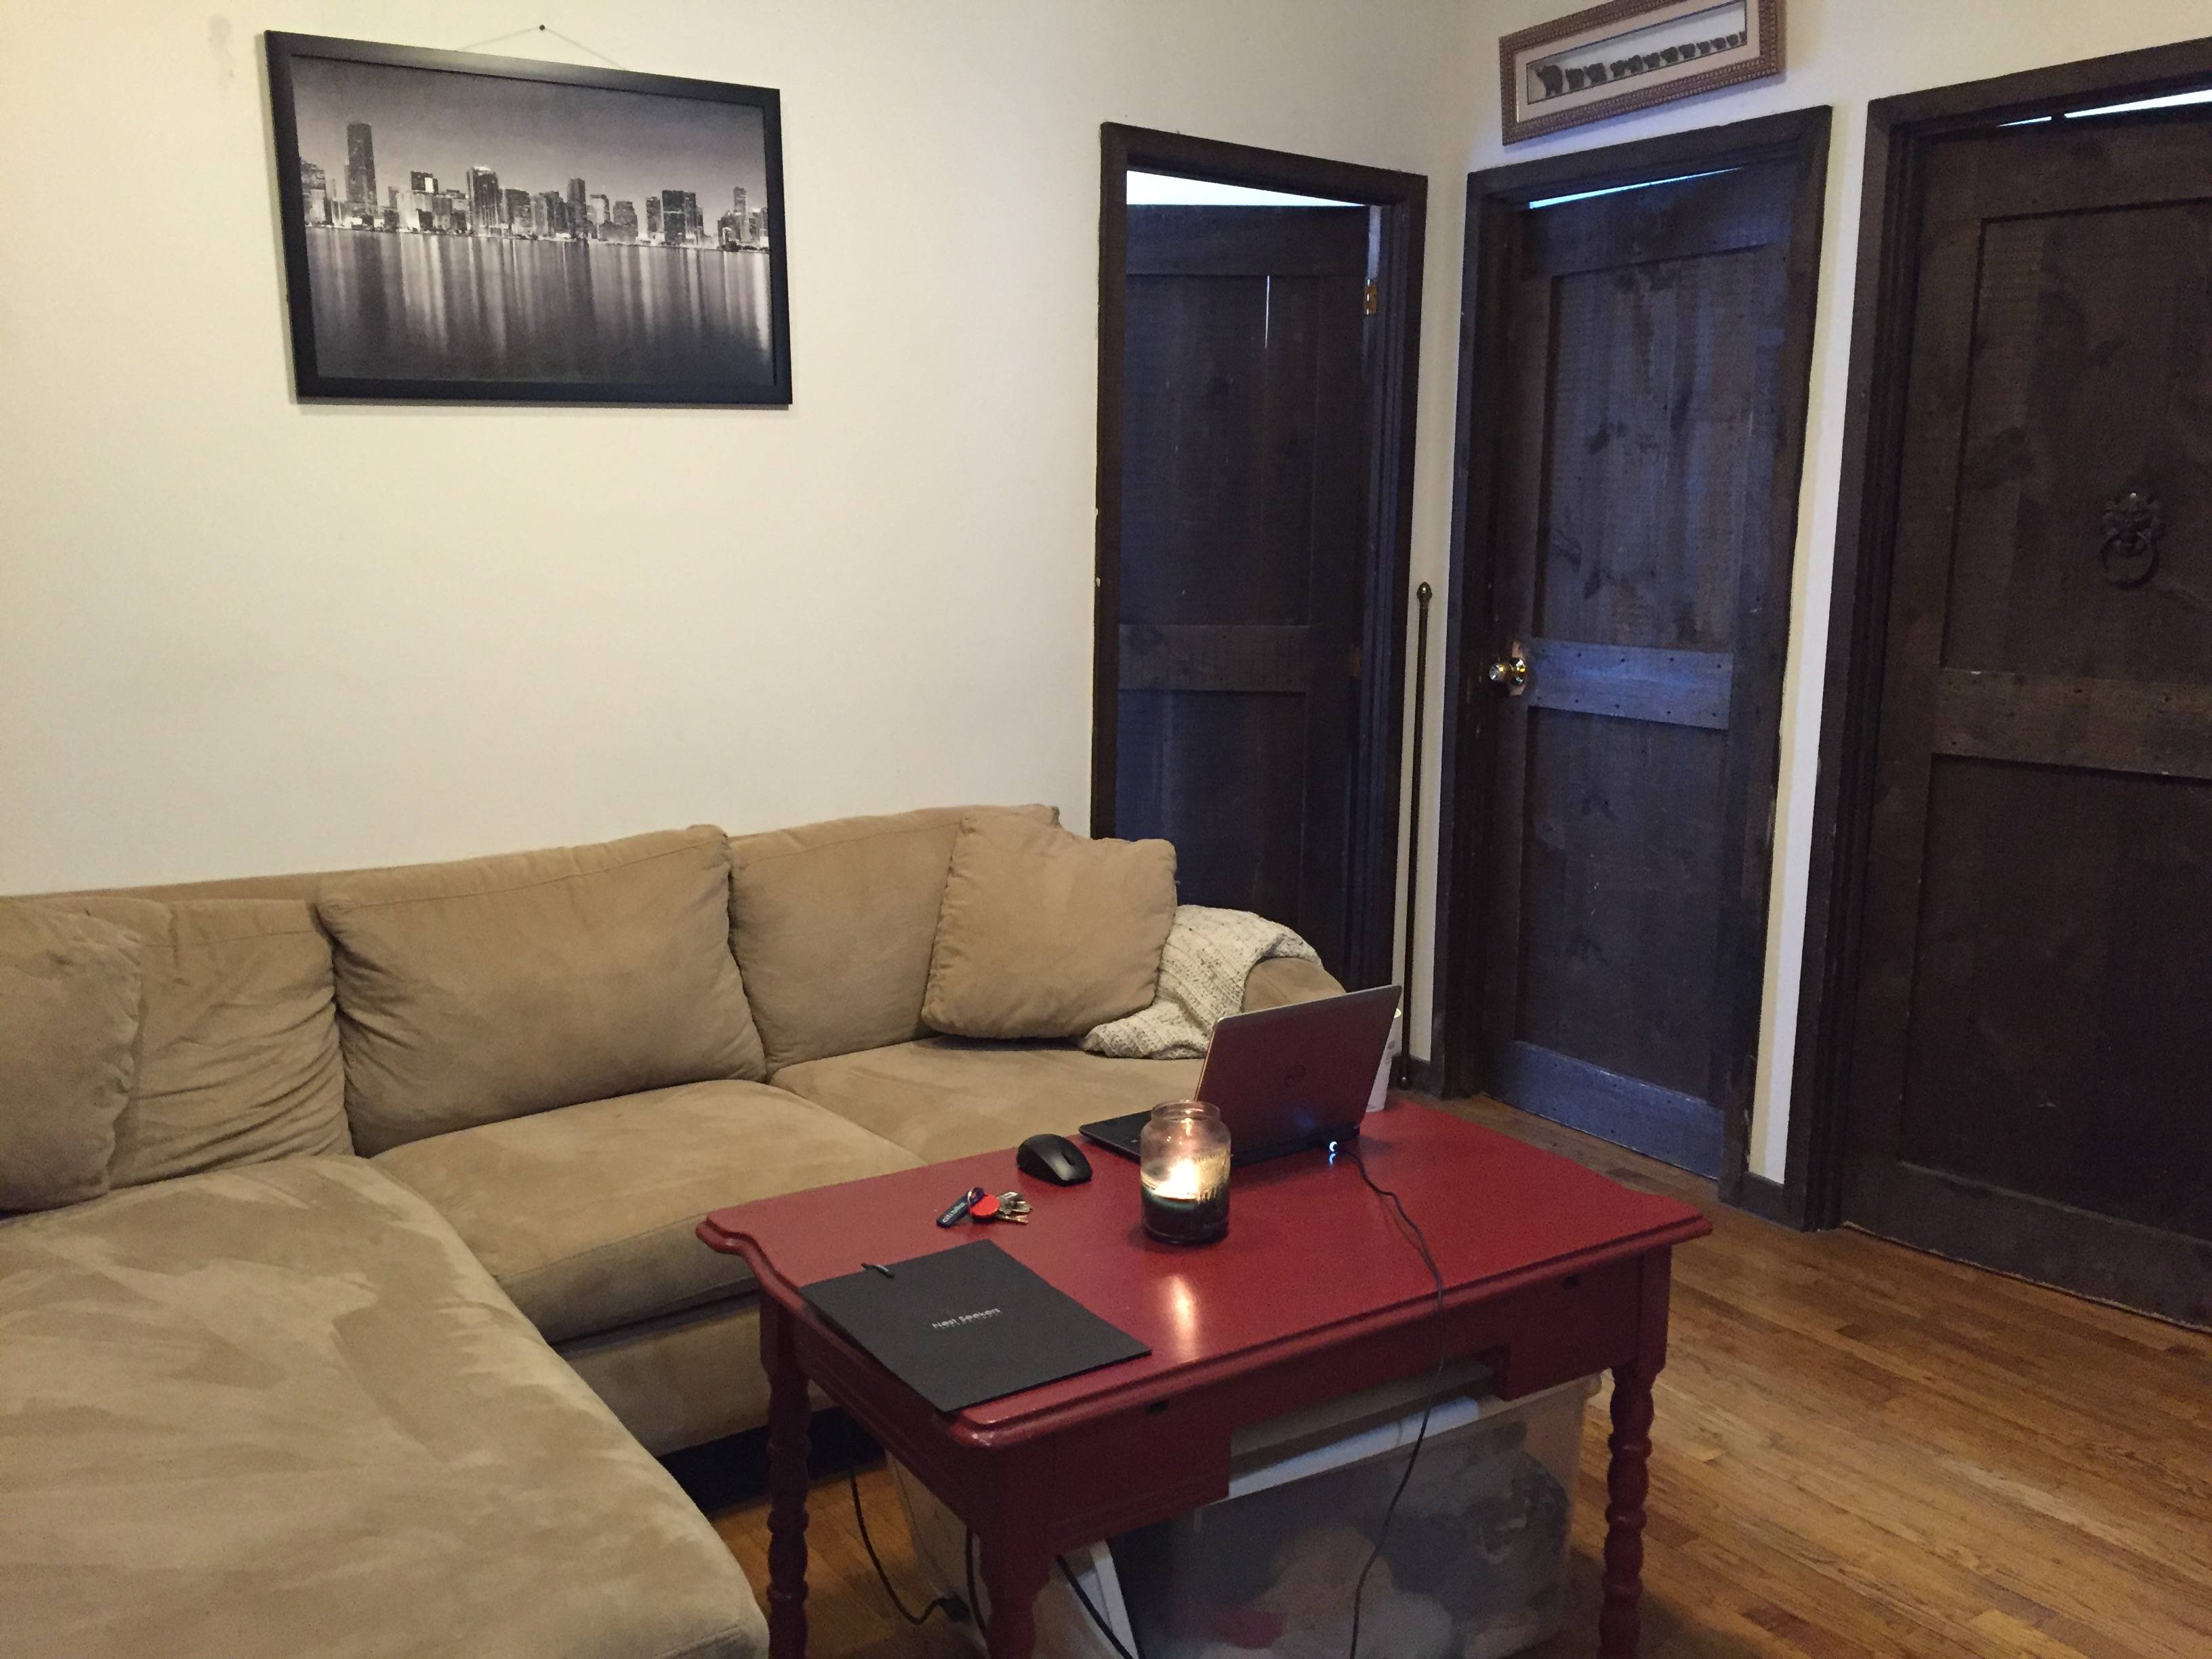 East Village: 4 Bedroom/2 Bath with Exposed Brick & Washer Dryer